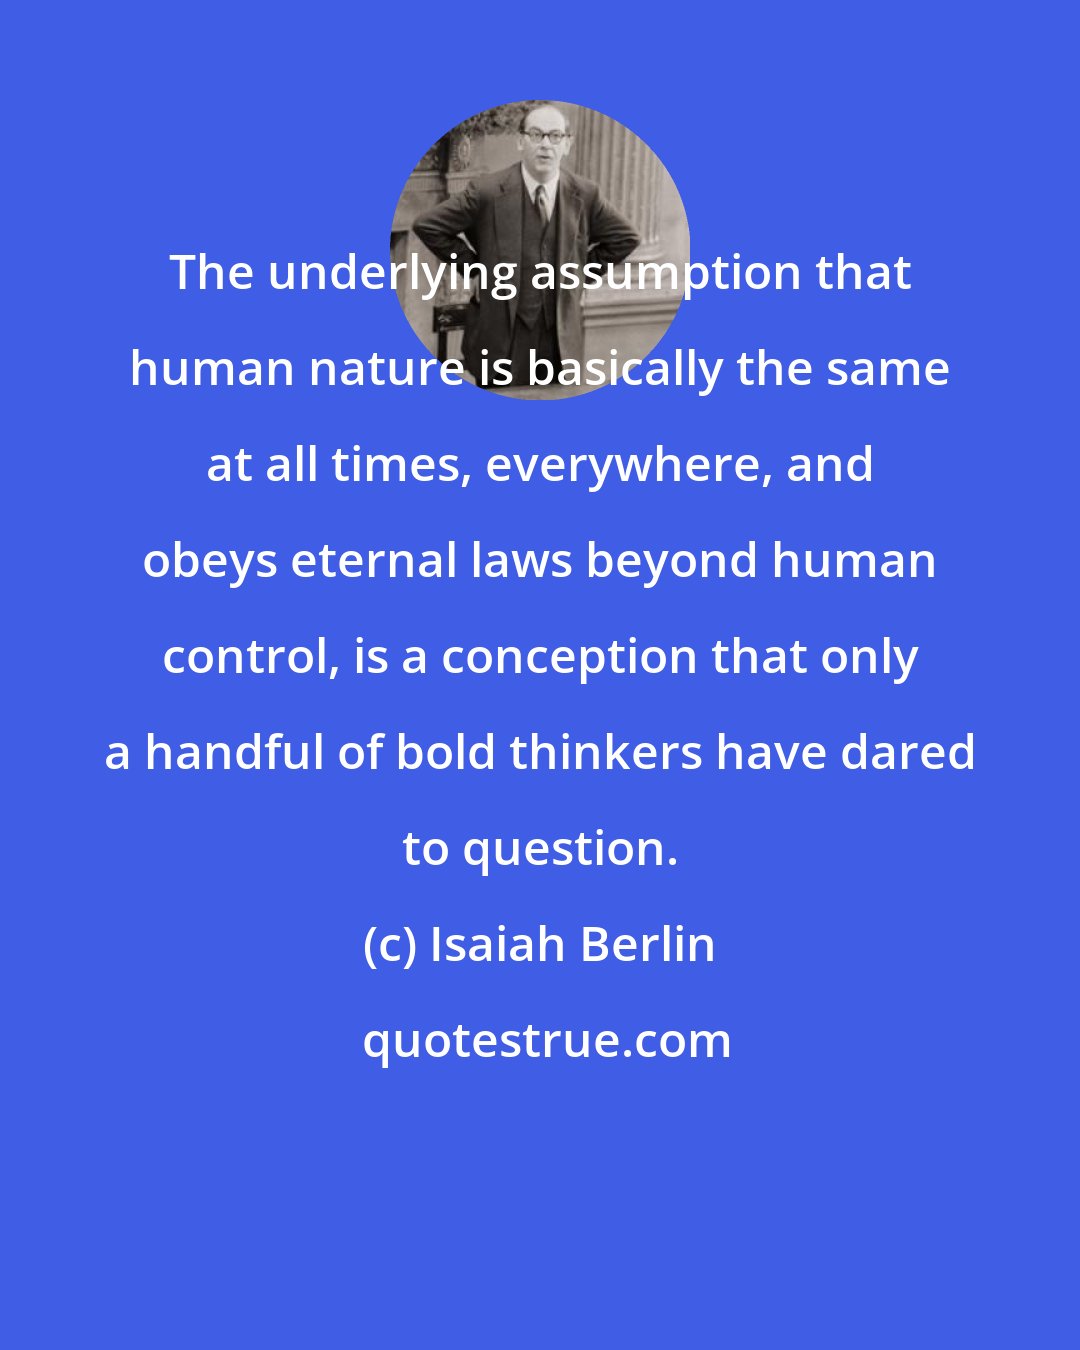 Isaiah Berlin: The underlying assumption that human nature is basically the same at all times, everywhere, and obeys eternal laws beyond human control, is a conception that only a handful of bold thinkers have dared to question.